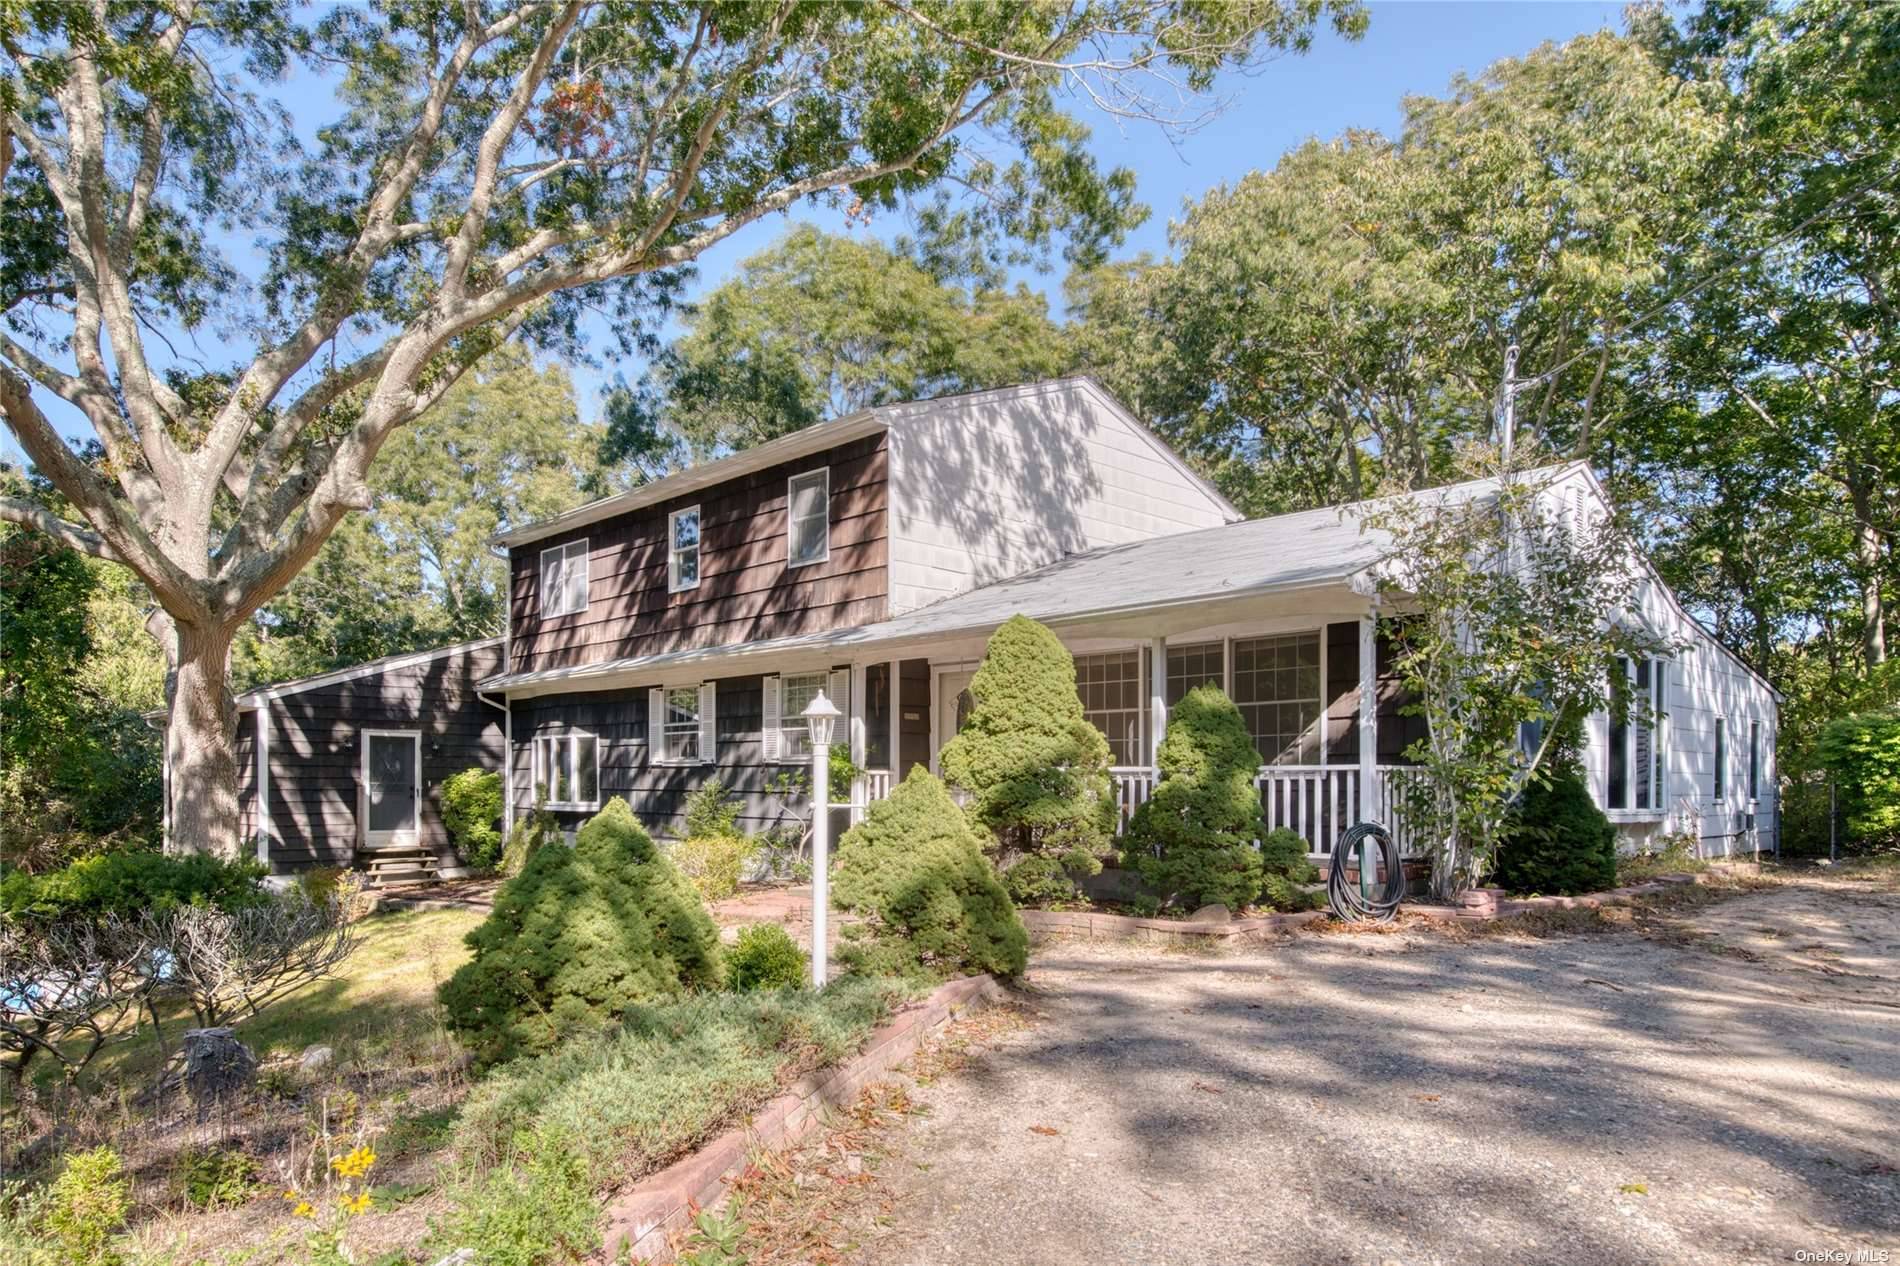 Opportunity knocks to renovate and transform this 2780 sq ft Sag Harbor country home into a Hamptons gem.